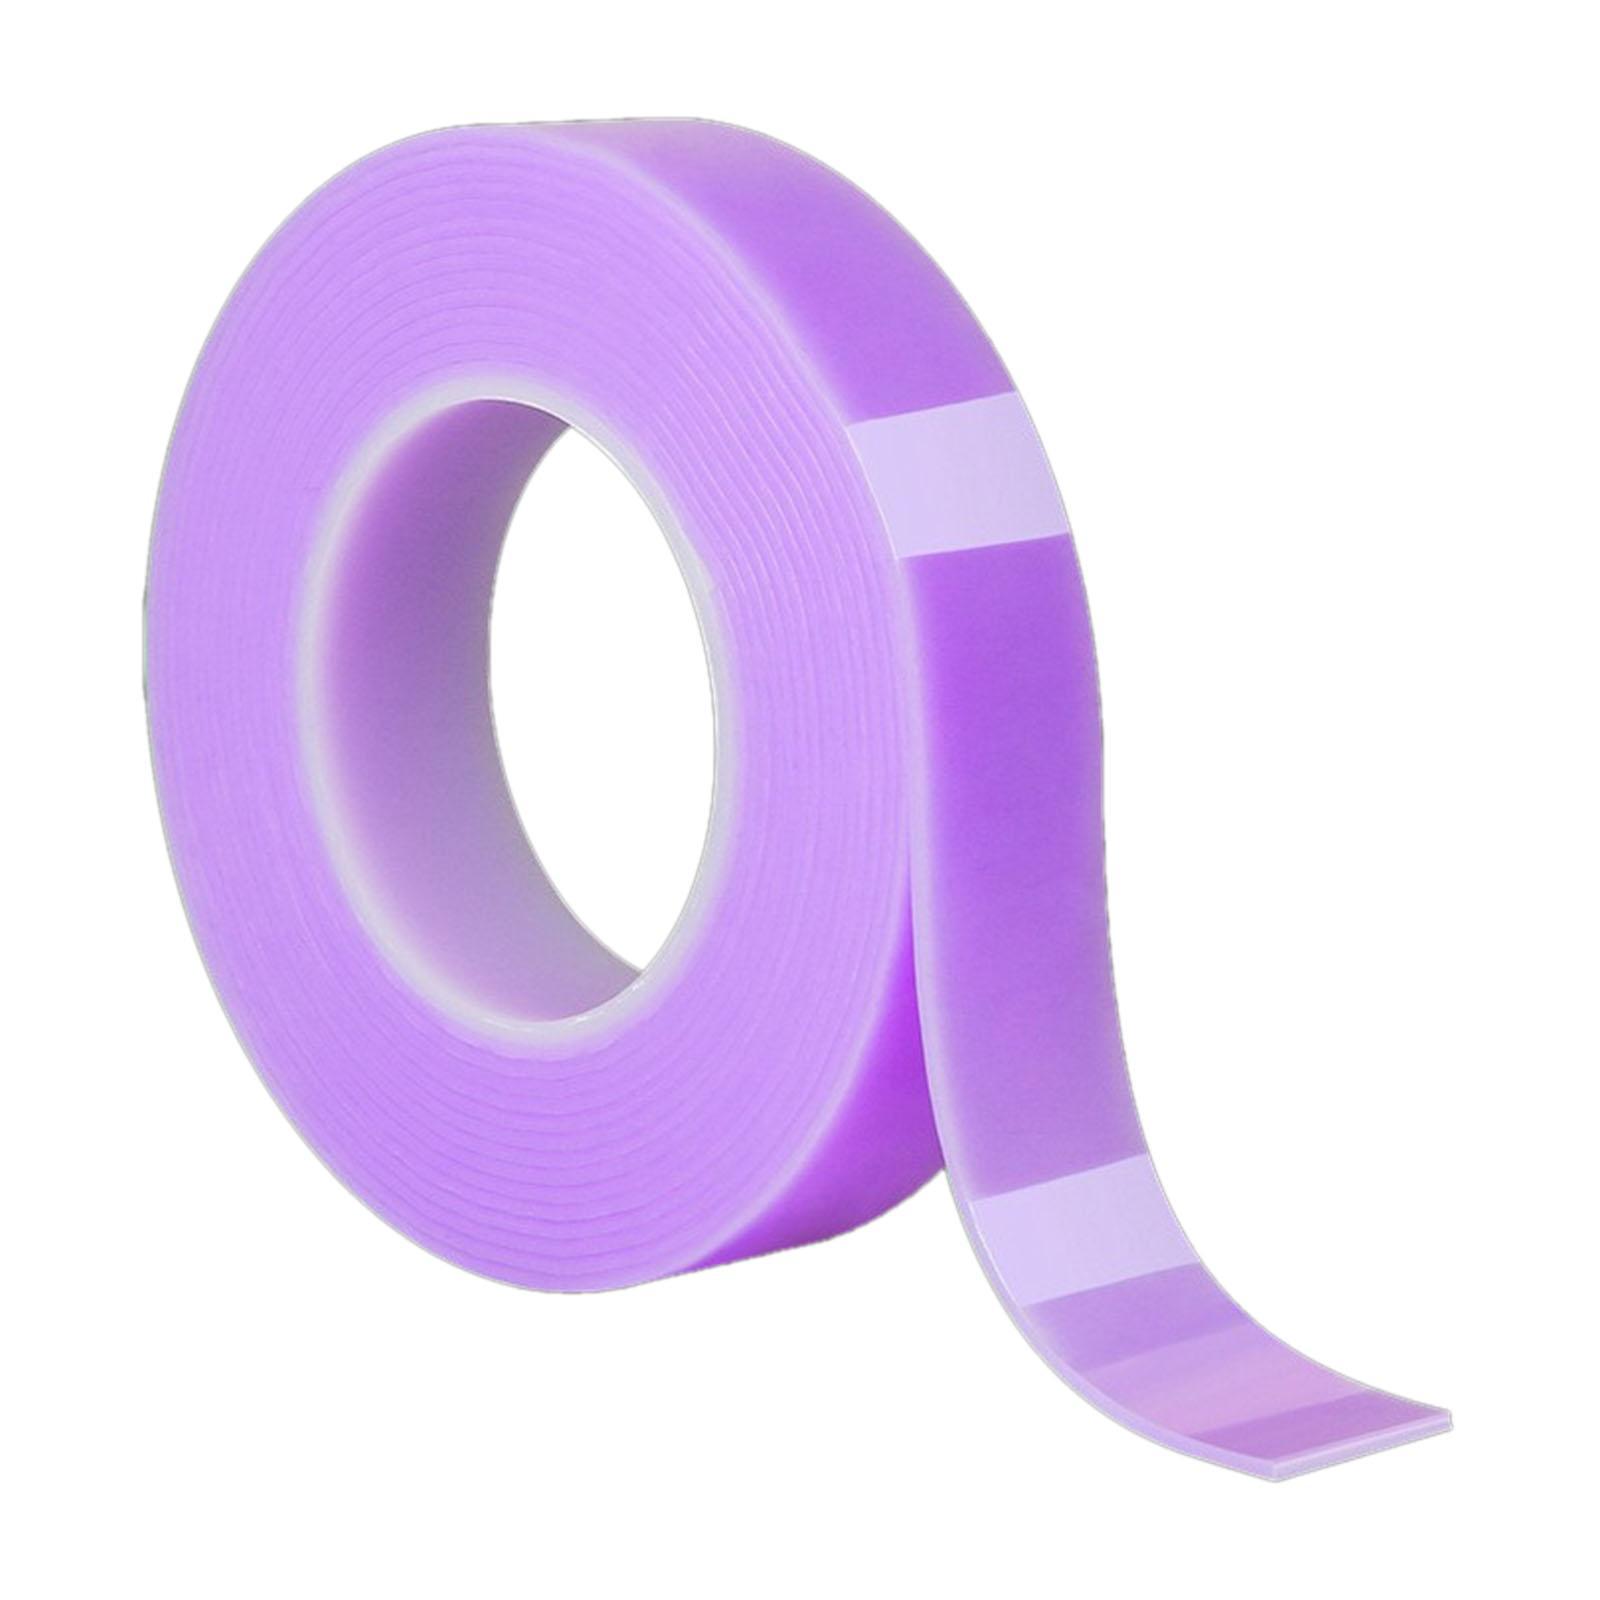 Bubble Blowing Double Sided Tape Reusable Non Marking Tape for Classroom DIY Craft